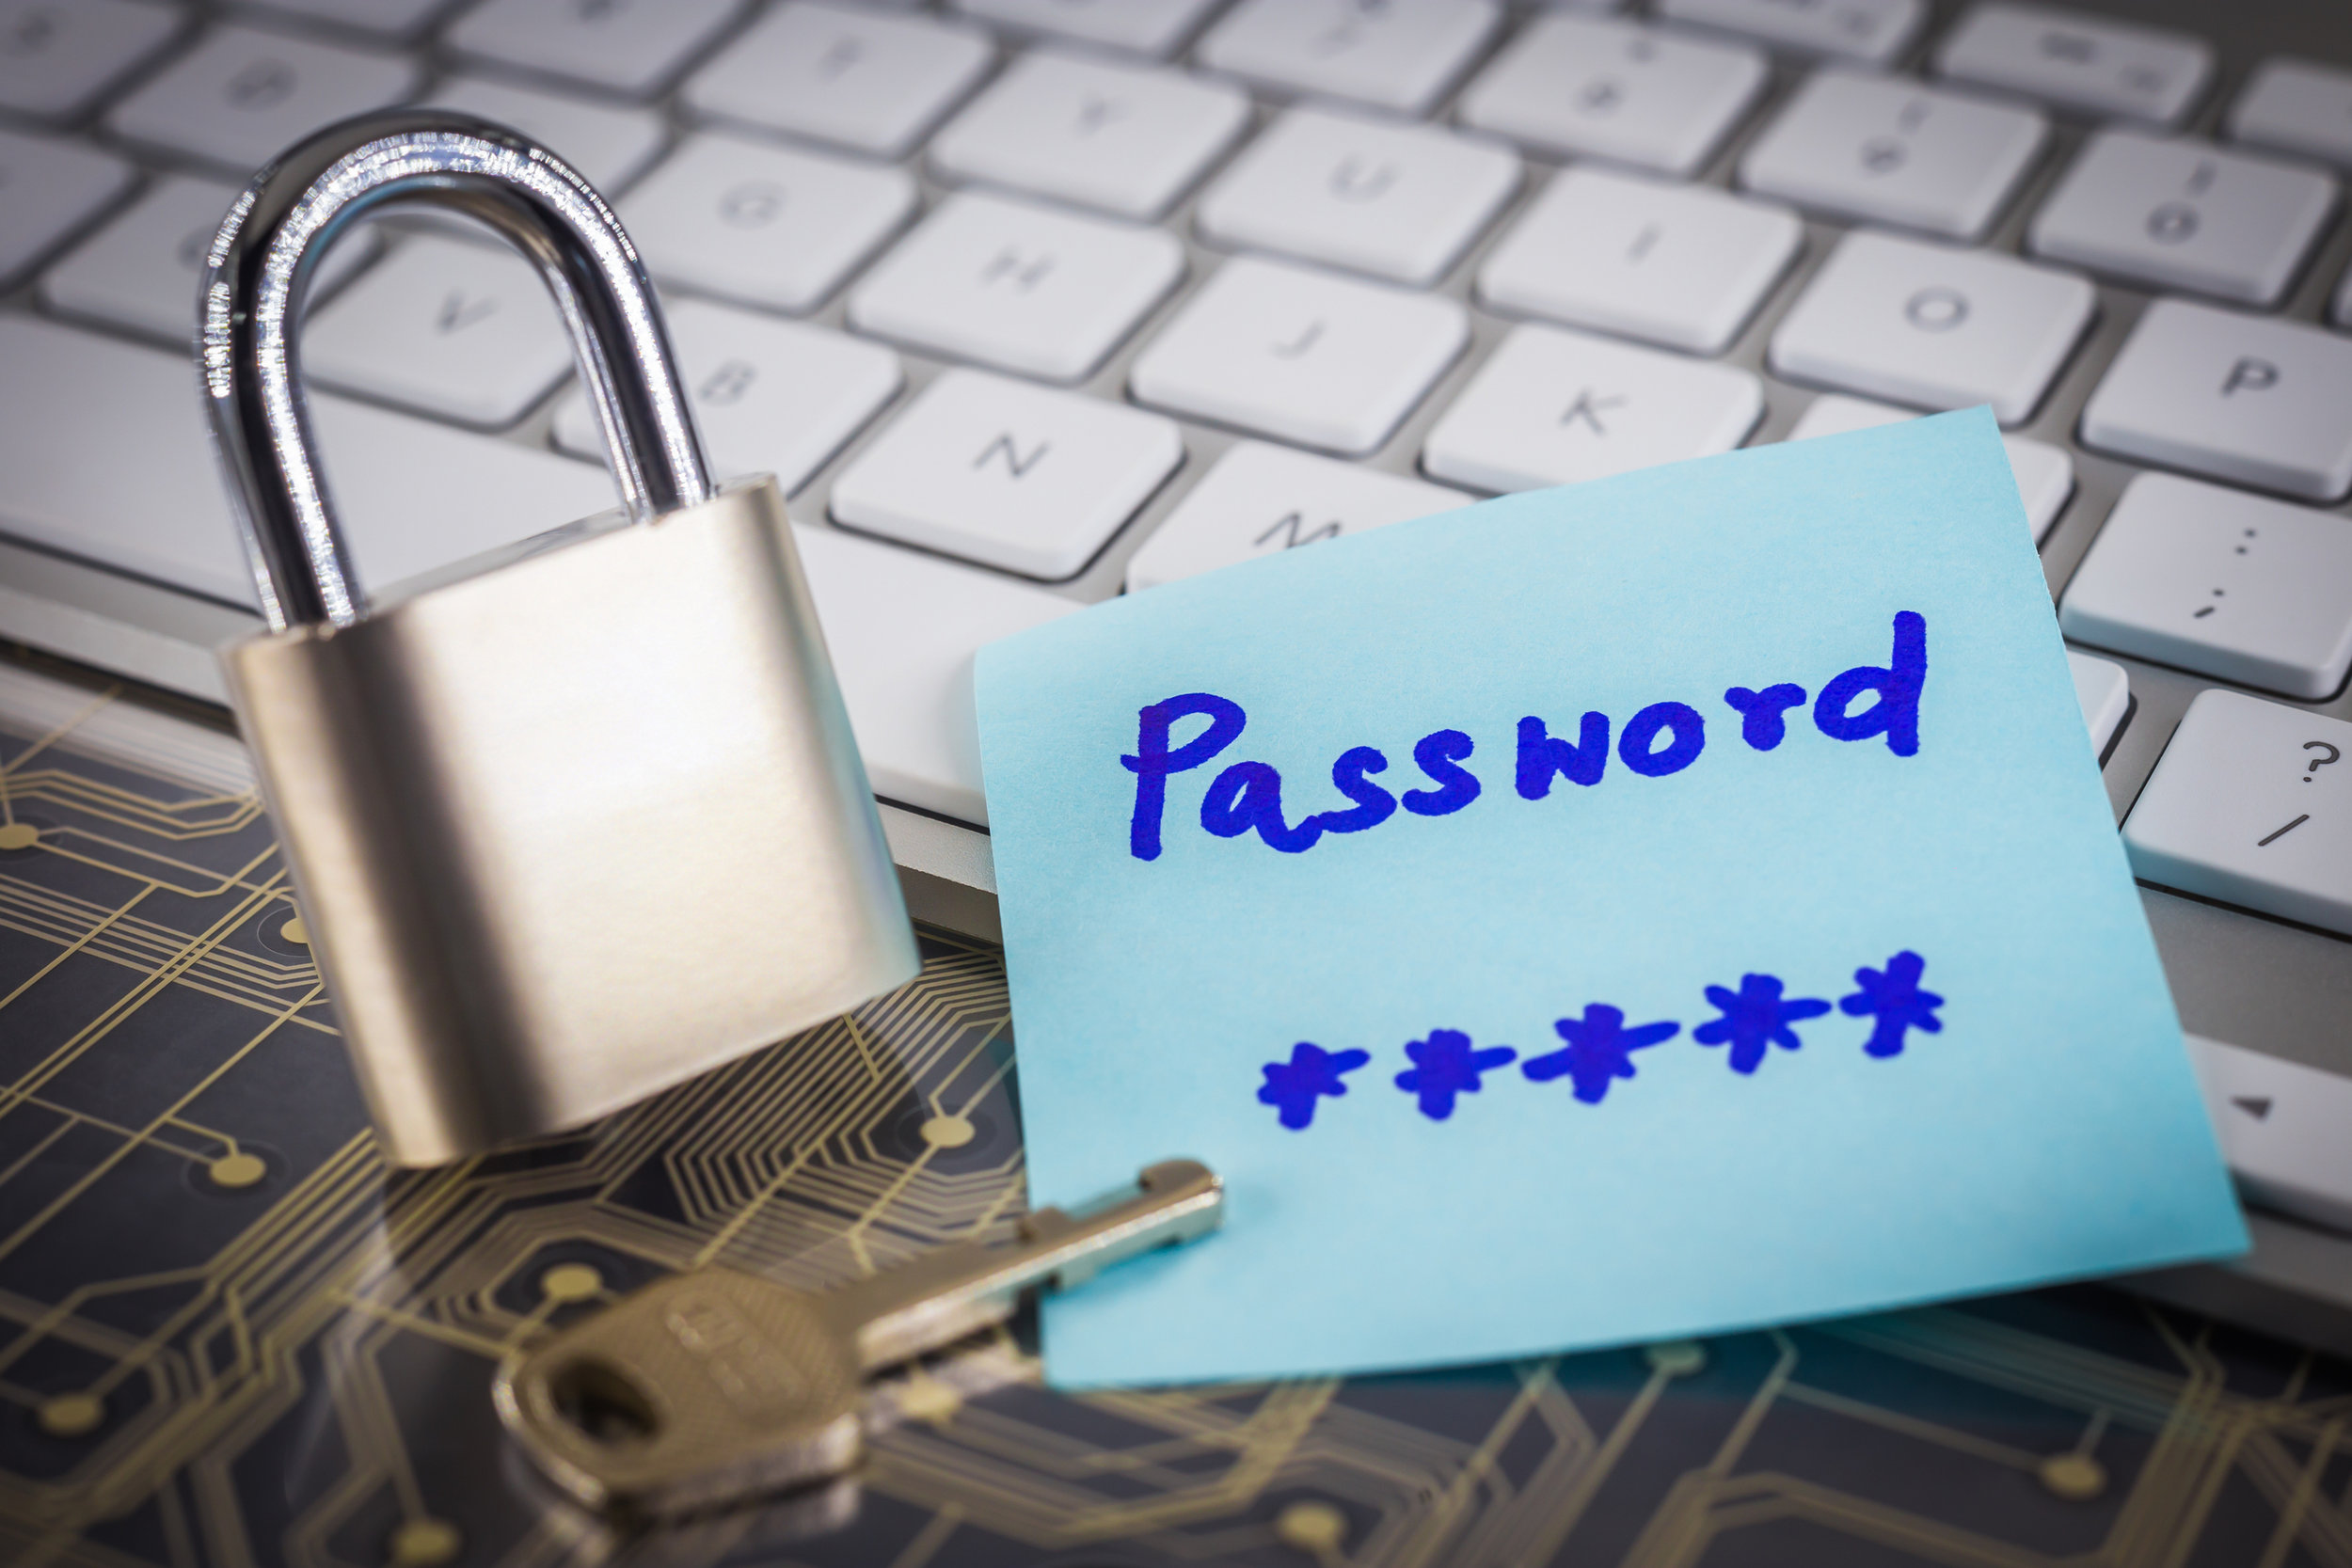 best practices for passwords manager admin